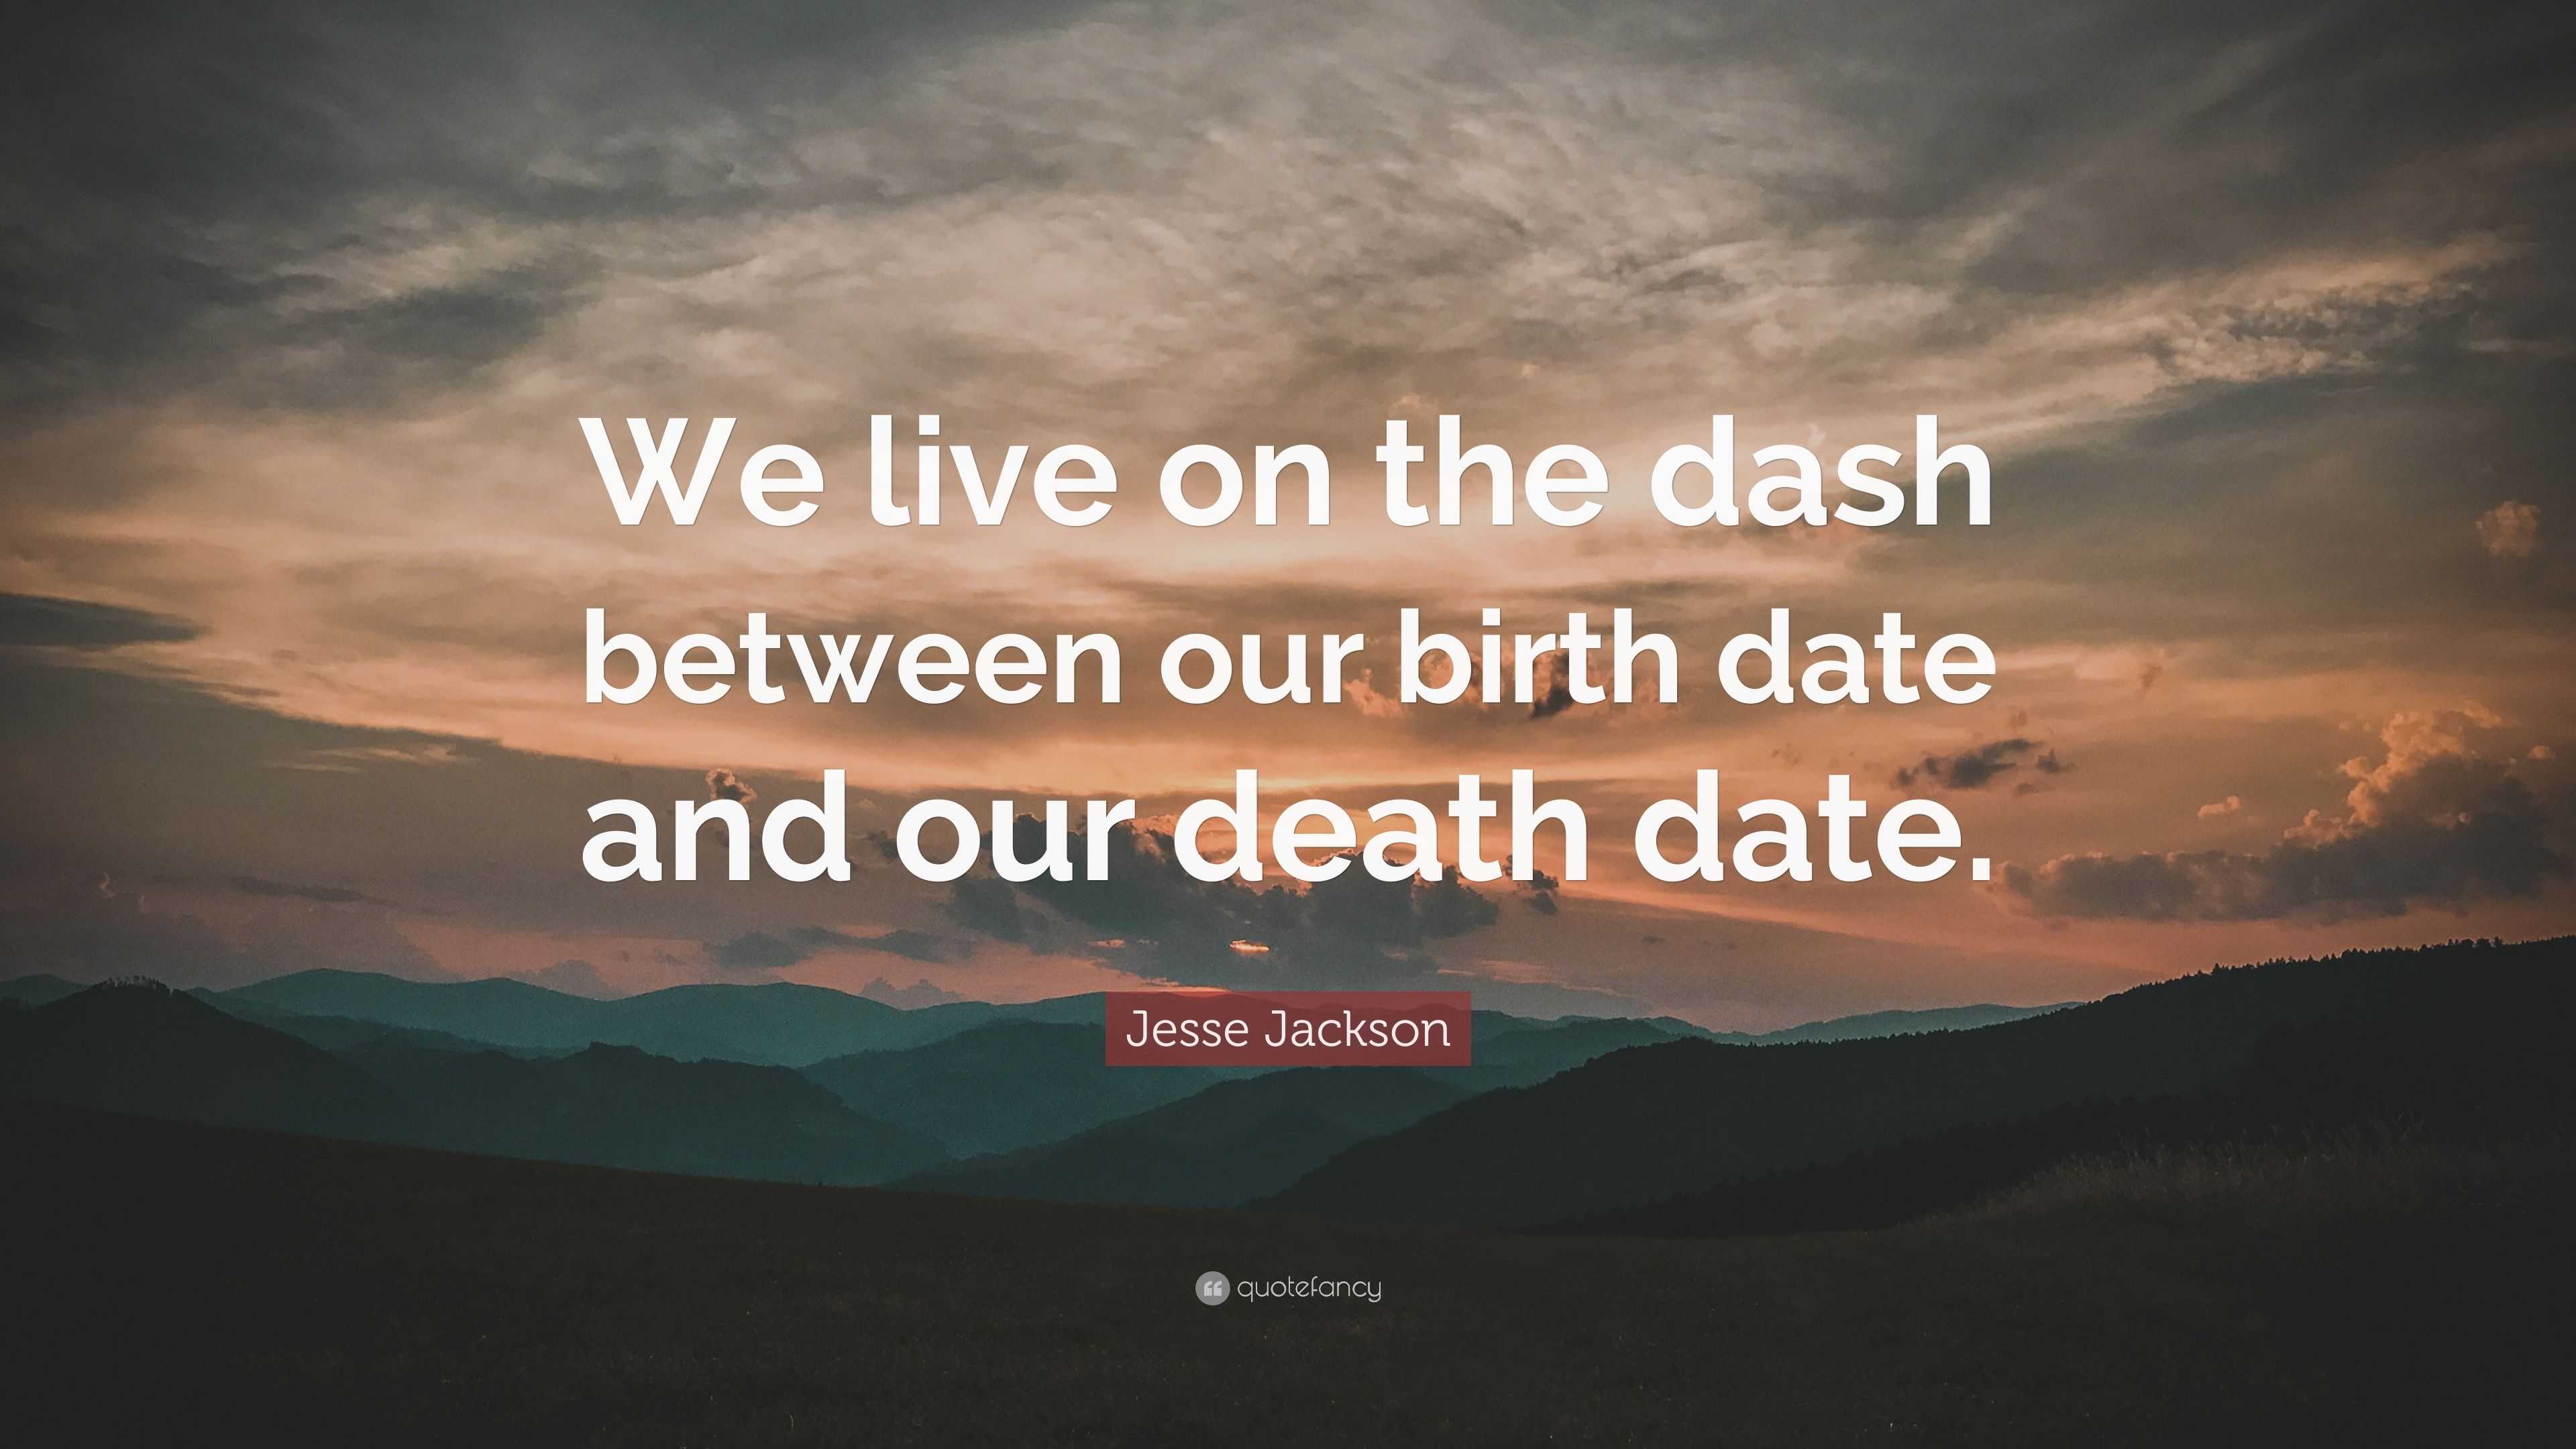 poem about dash between birth and death